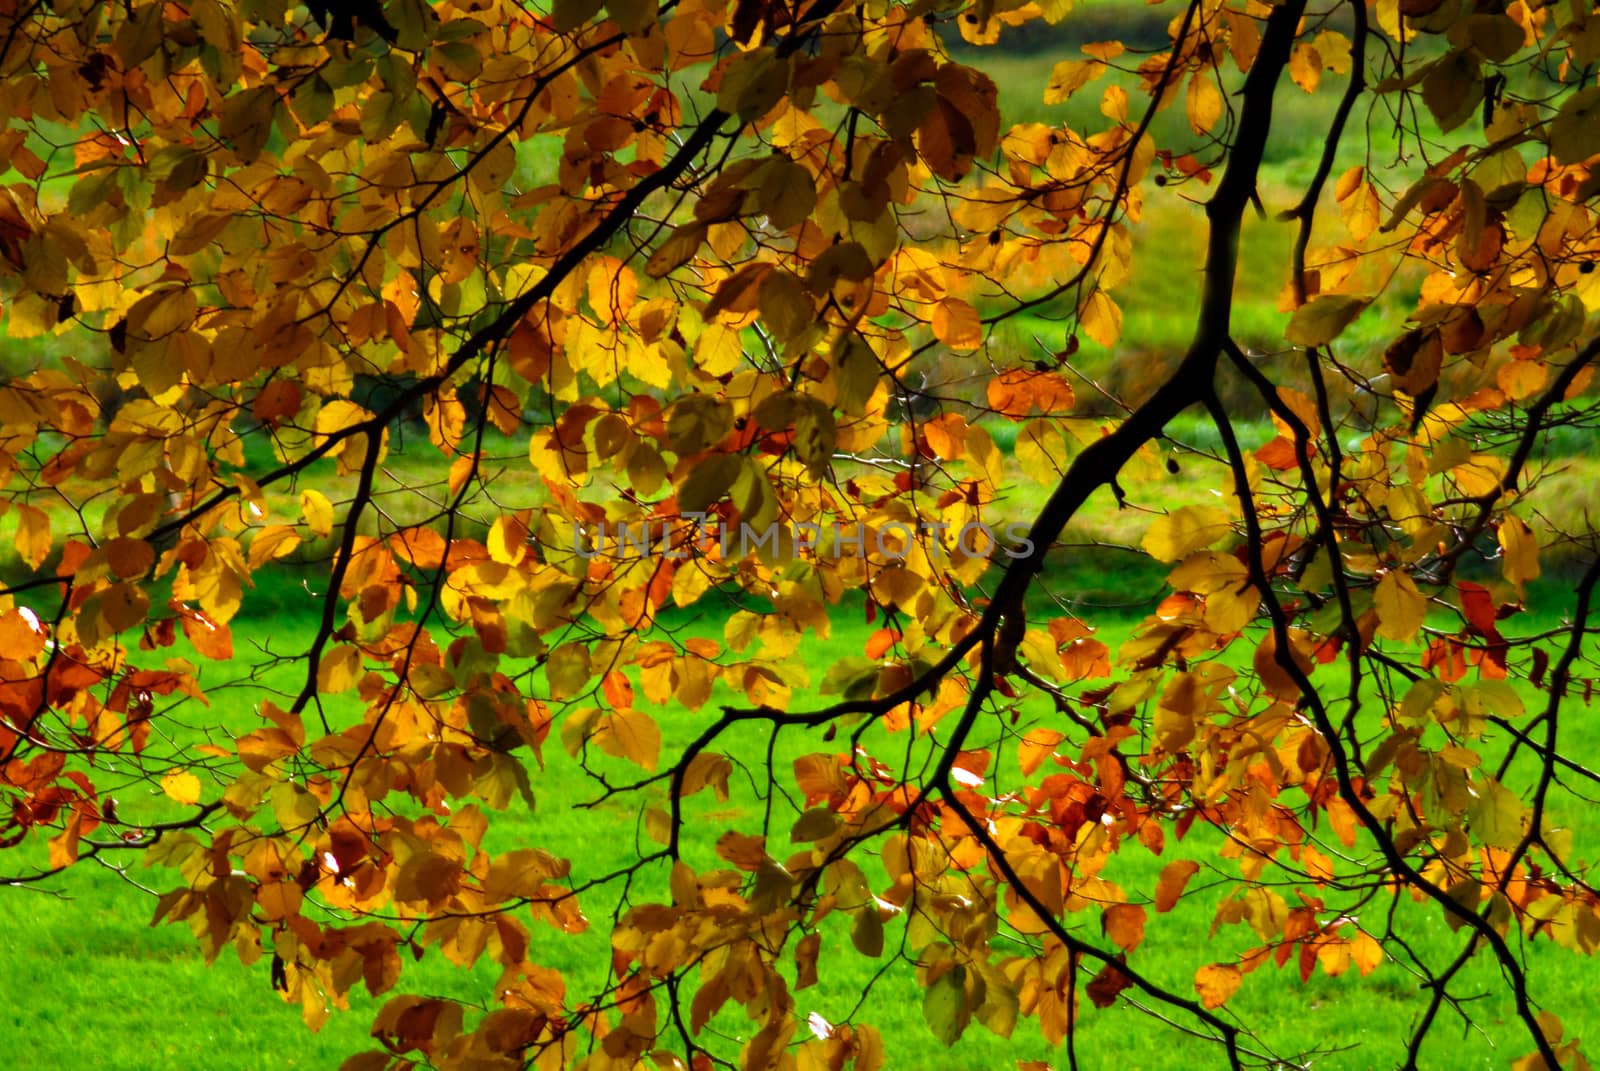 Autumn fall view through autumnal colored leafs yellow orange re by MXW_Stock